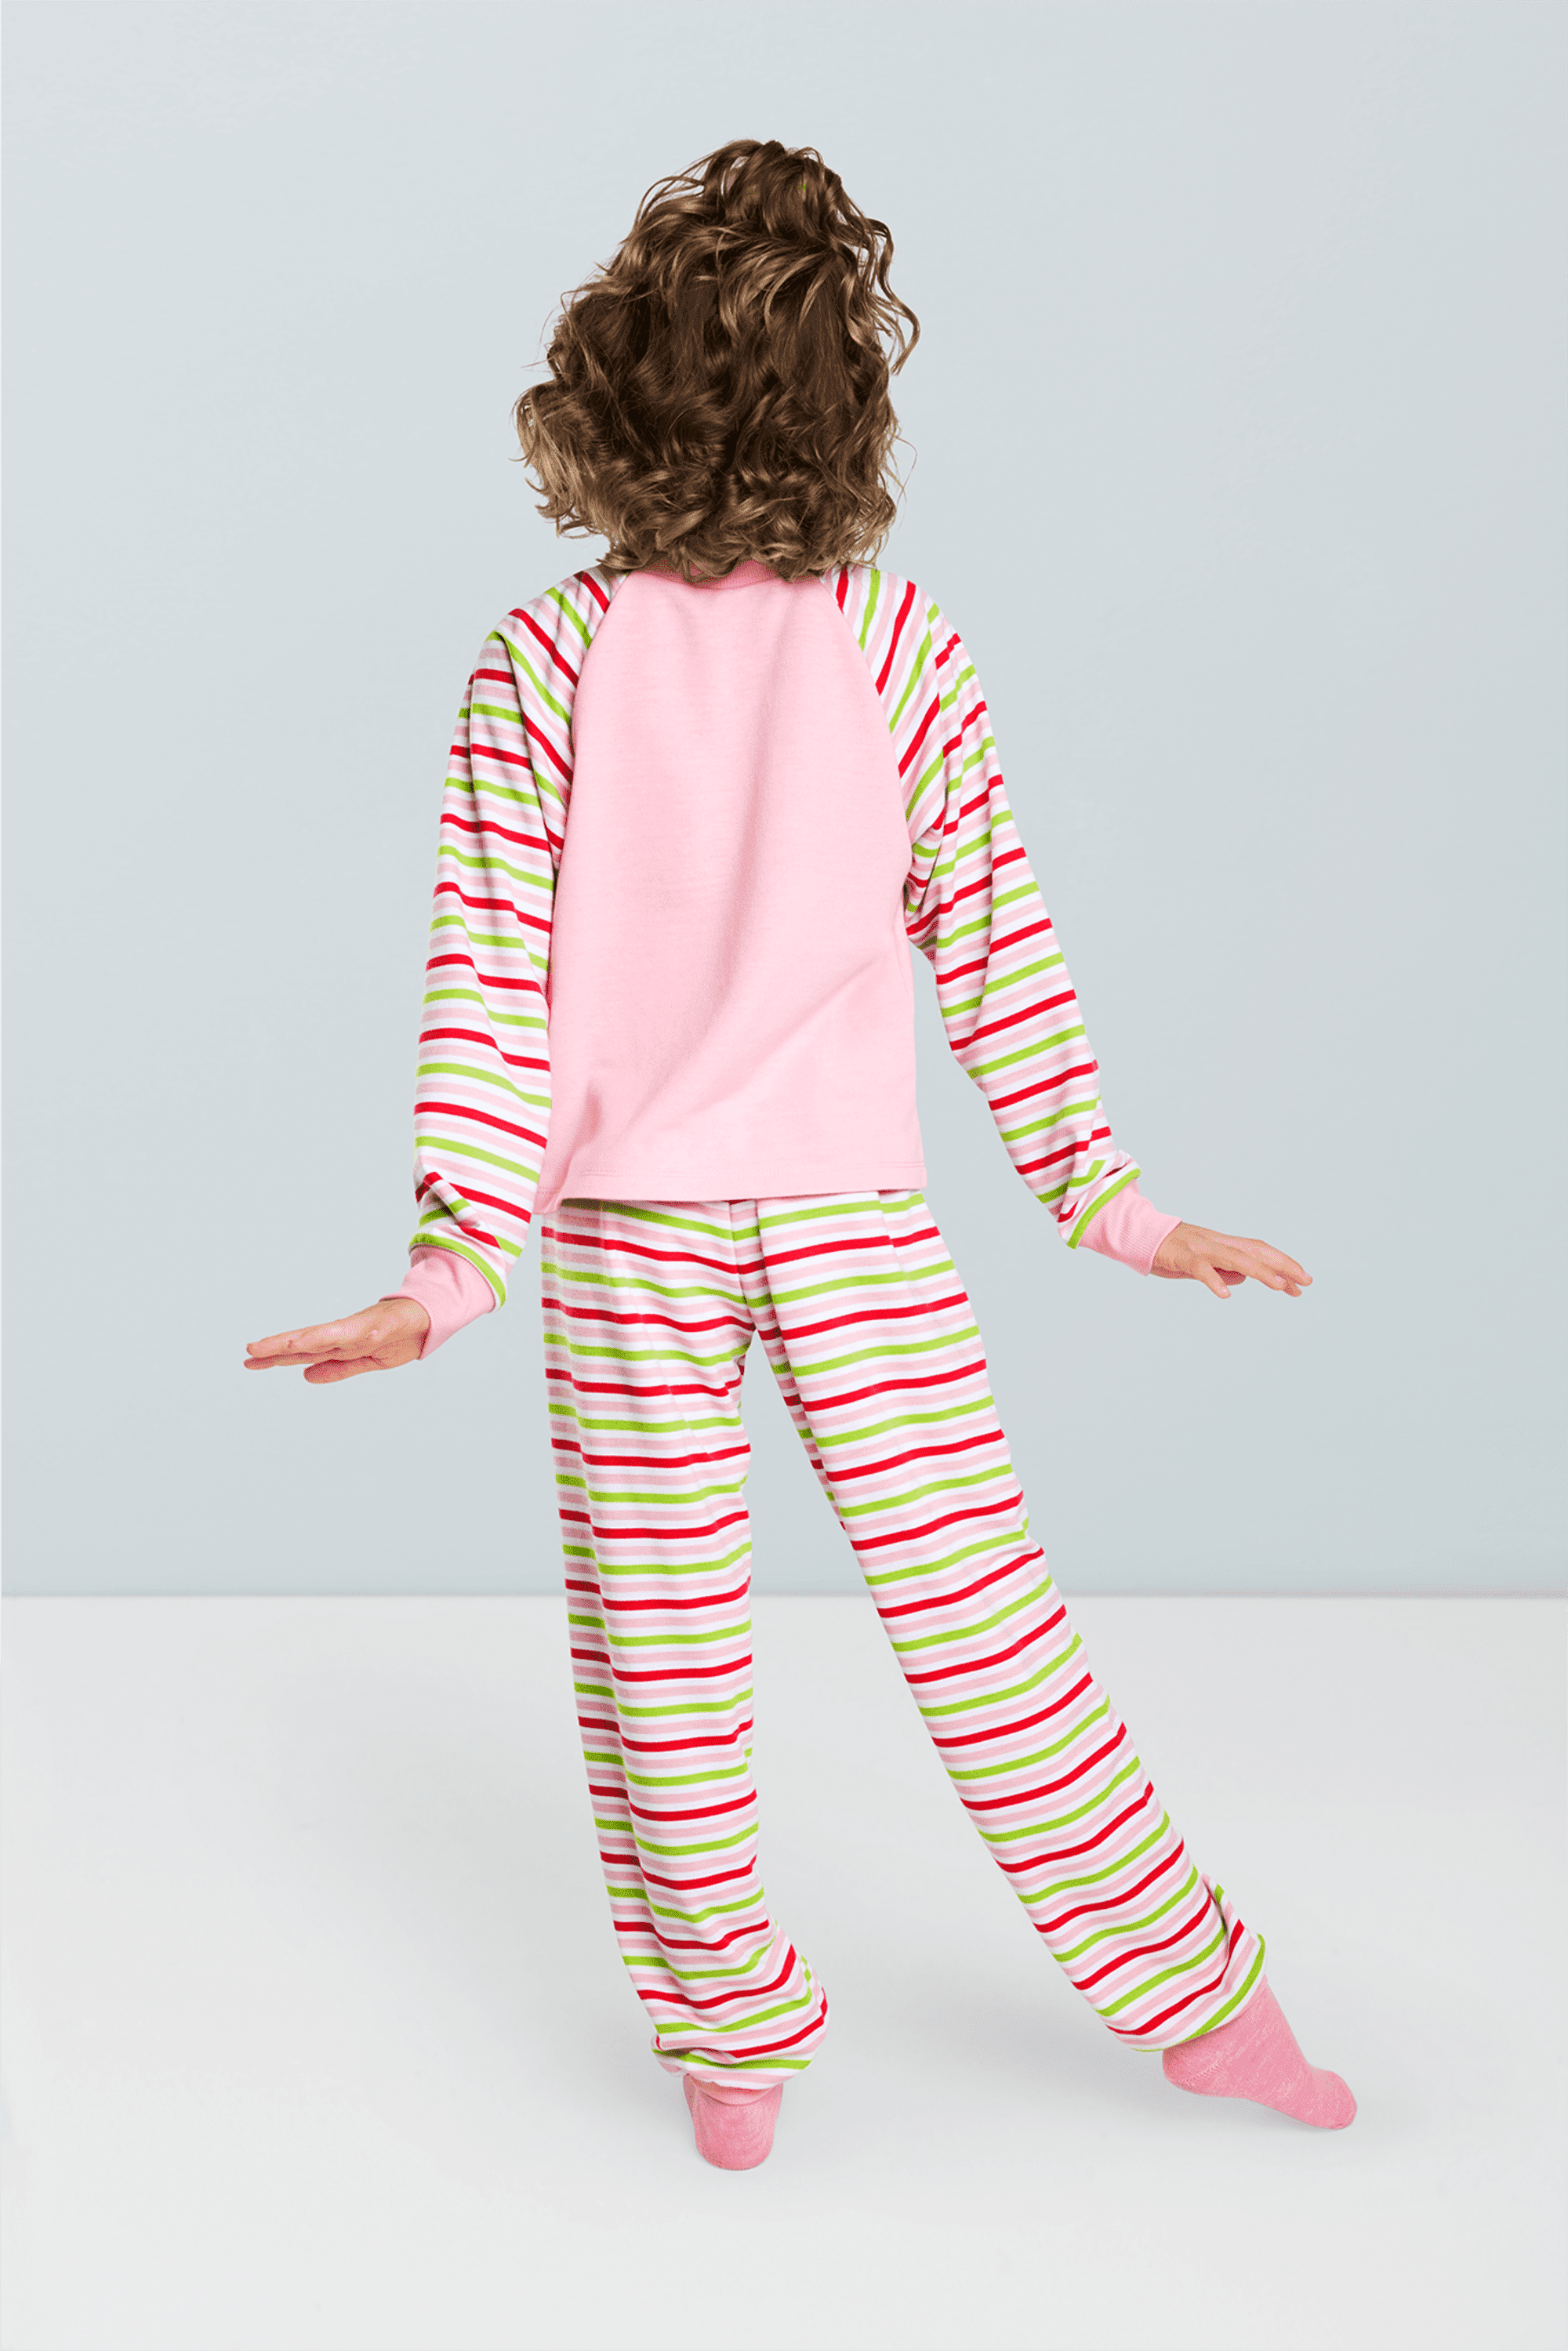 Courtney's™ Strawberry Shortcake™ Pajamas for Girls (Historical Characters)